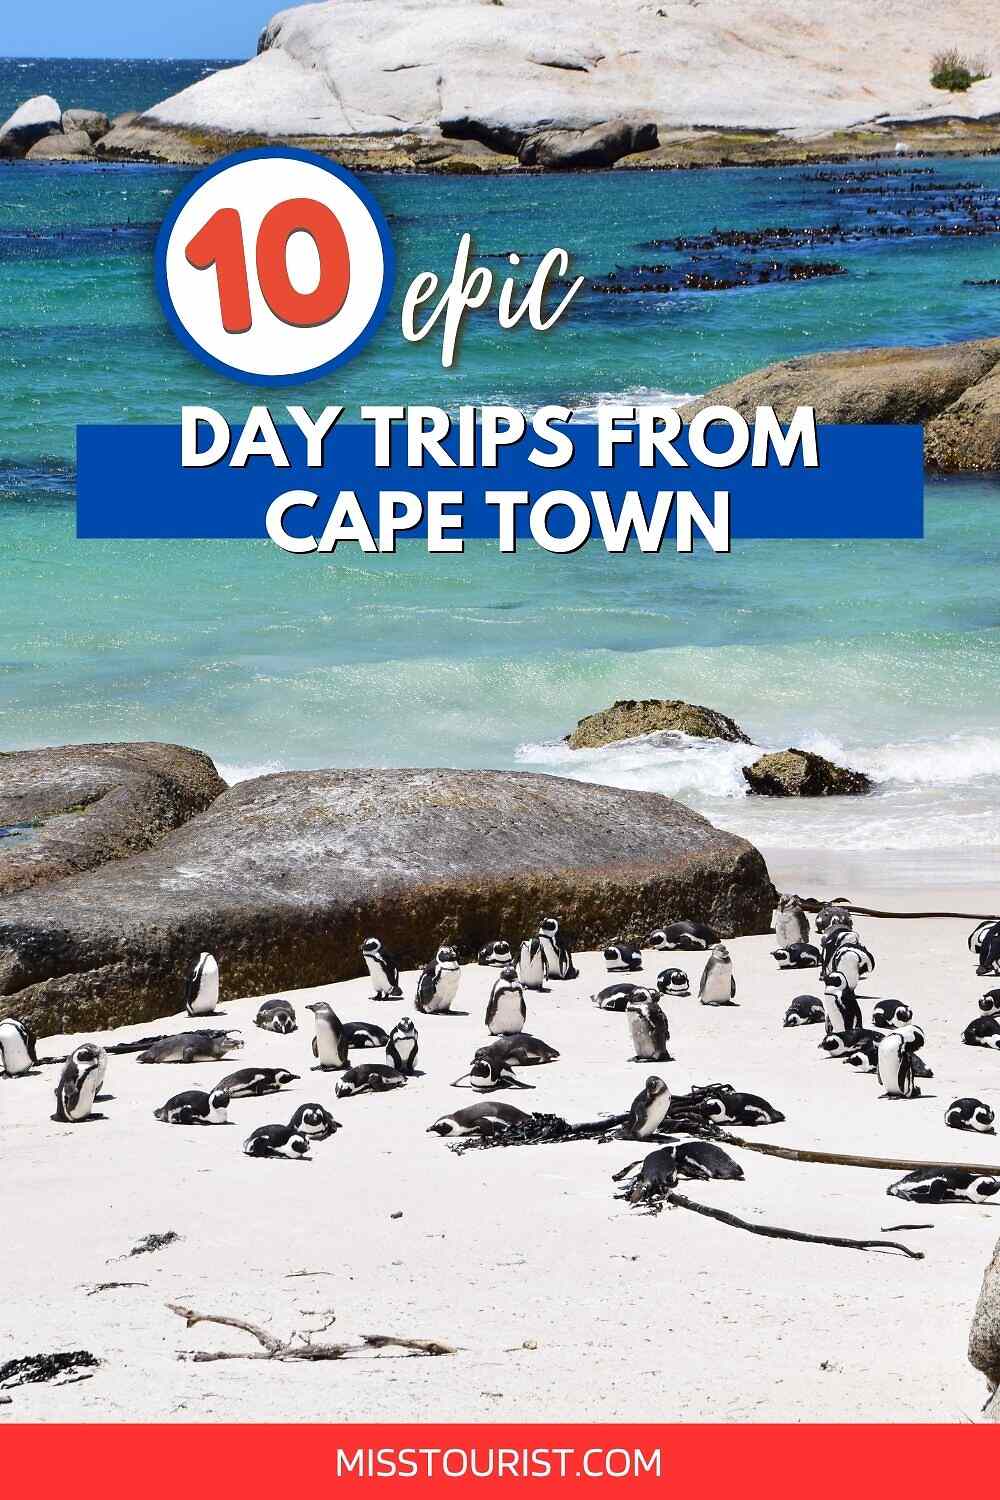 A sign reading "10 epic day trips from Cape Town" is shown above a beach with numerous penguins, rocks, and turquoise ocean water in the background. The URL "MISSTOURIST.COM" appears at the bottom.